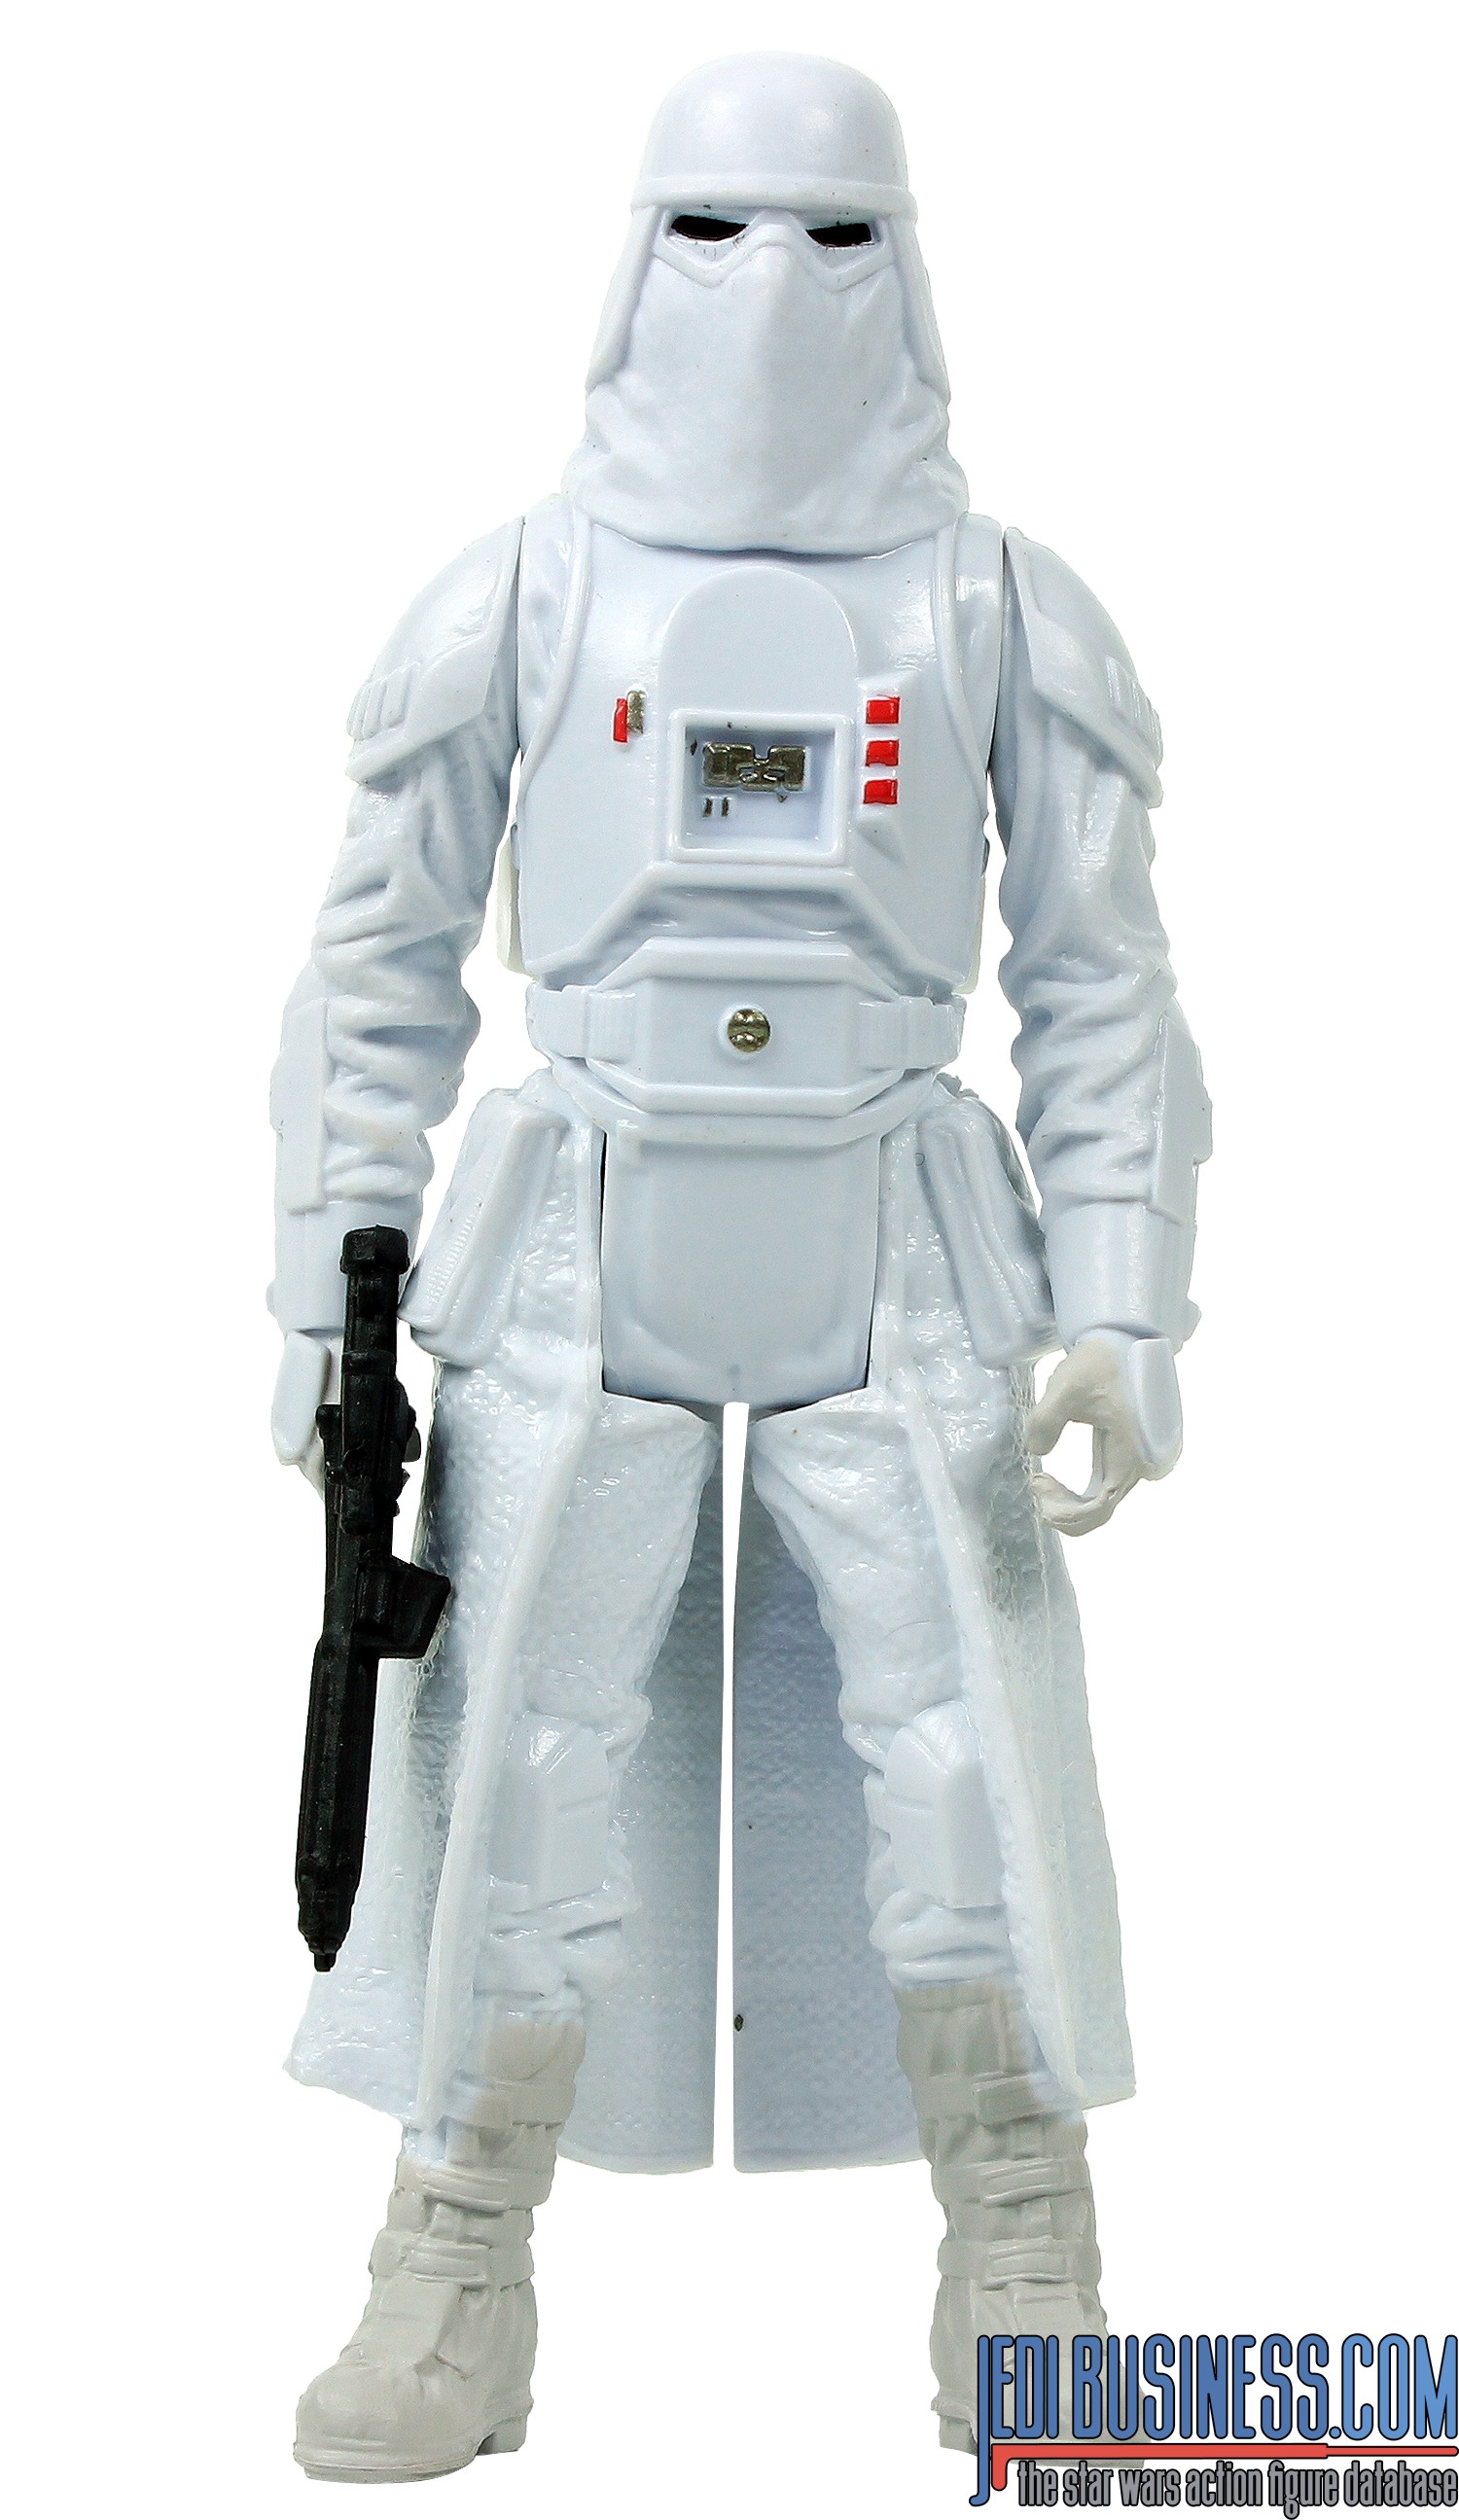 Snowtrooper Galactic Empire 5-Pack